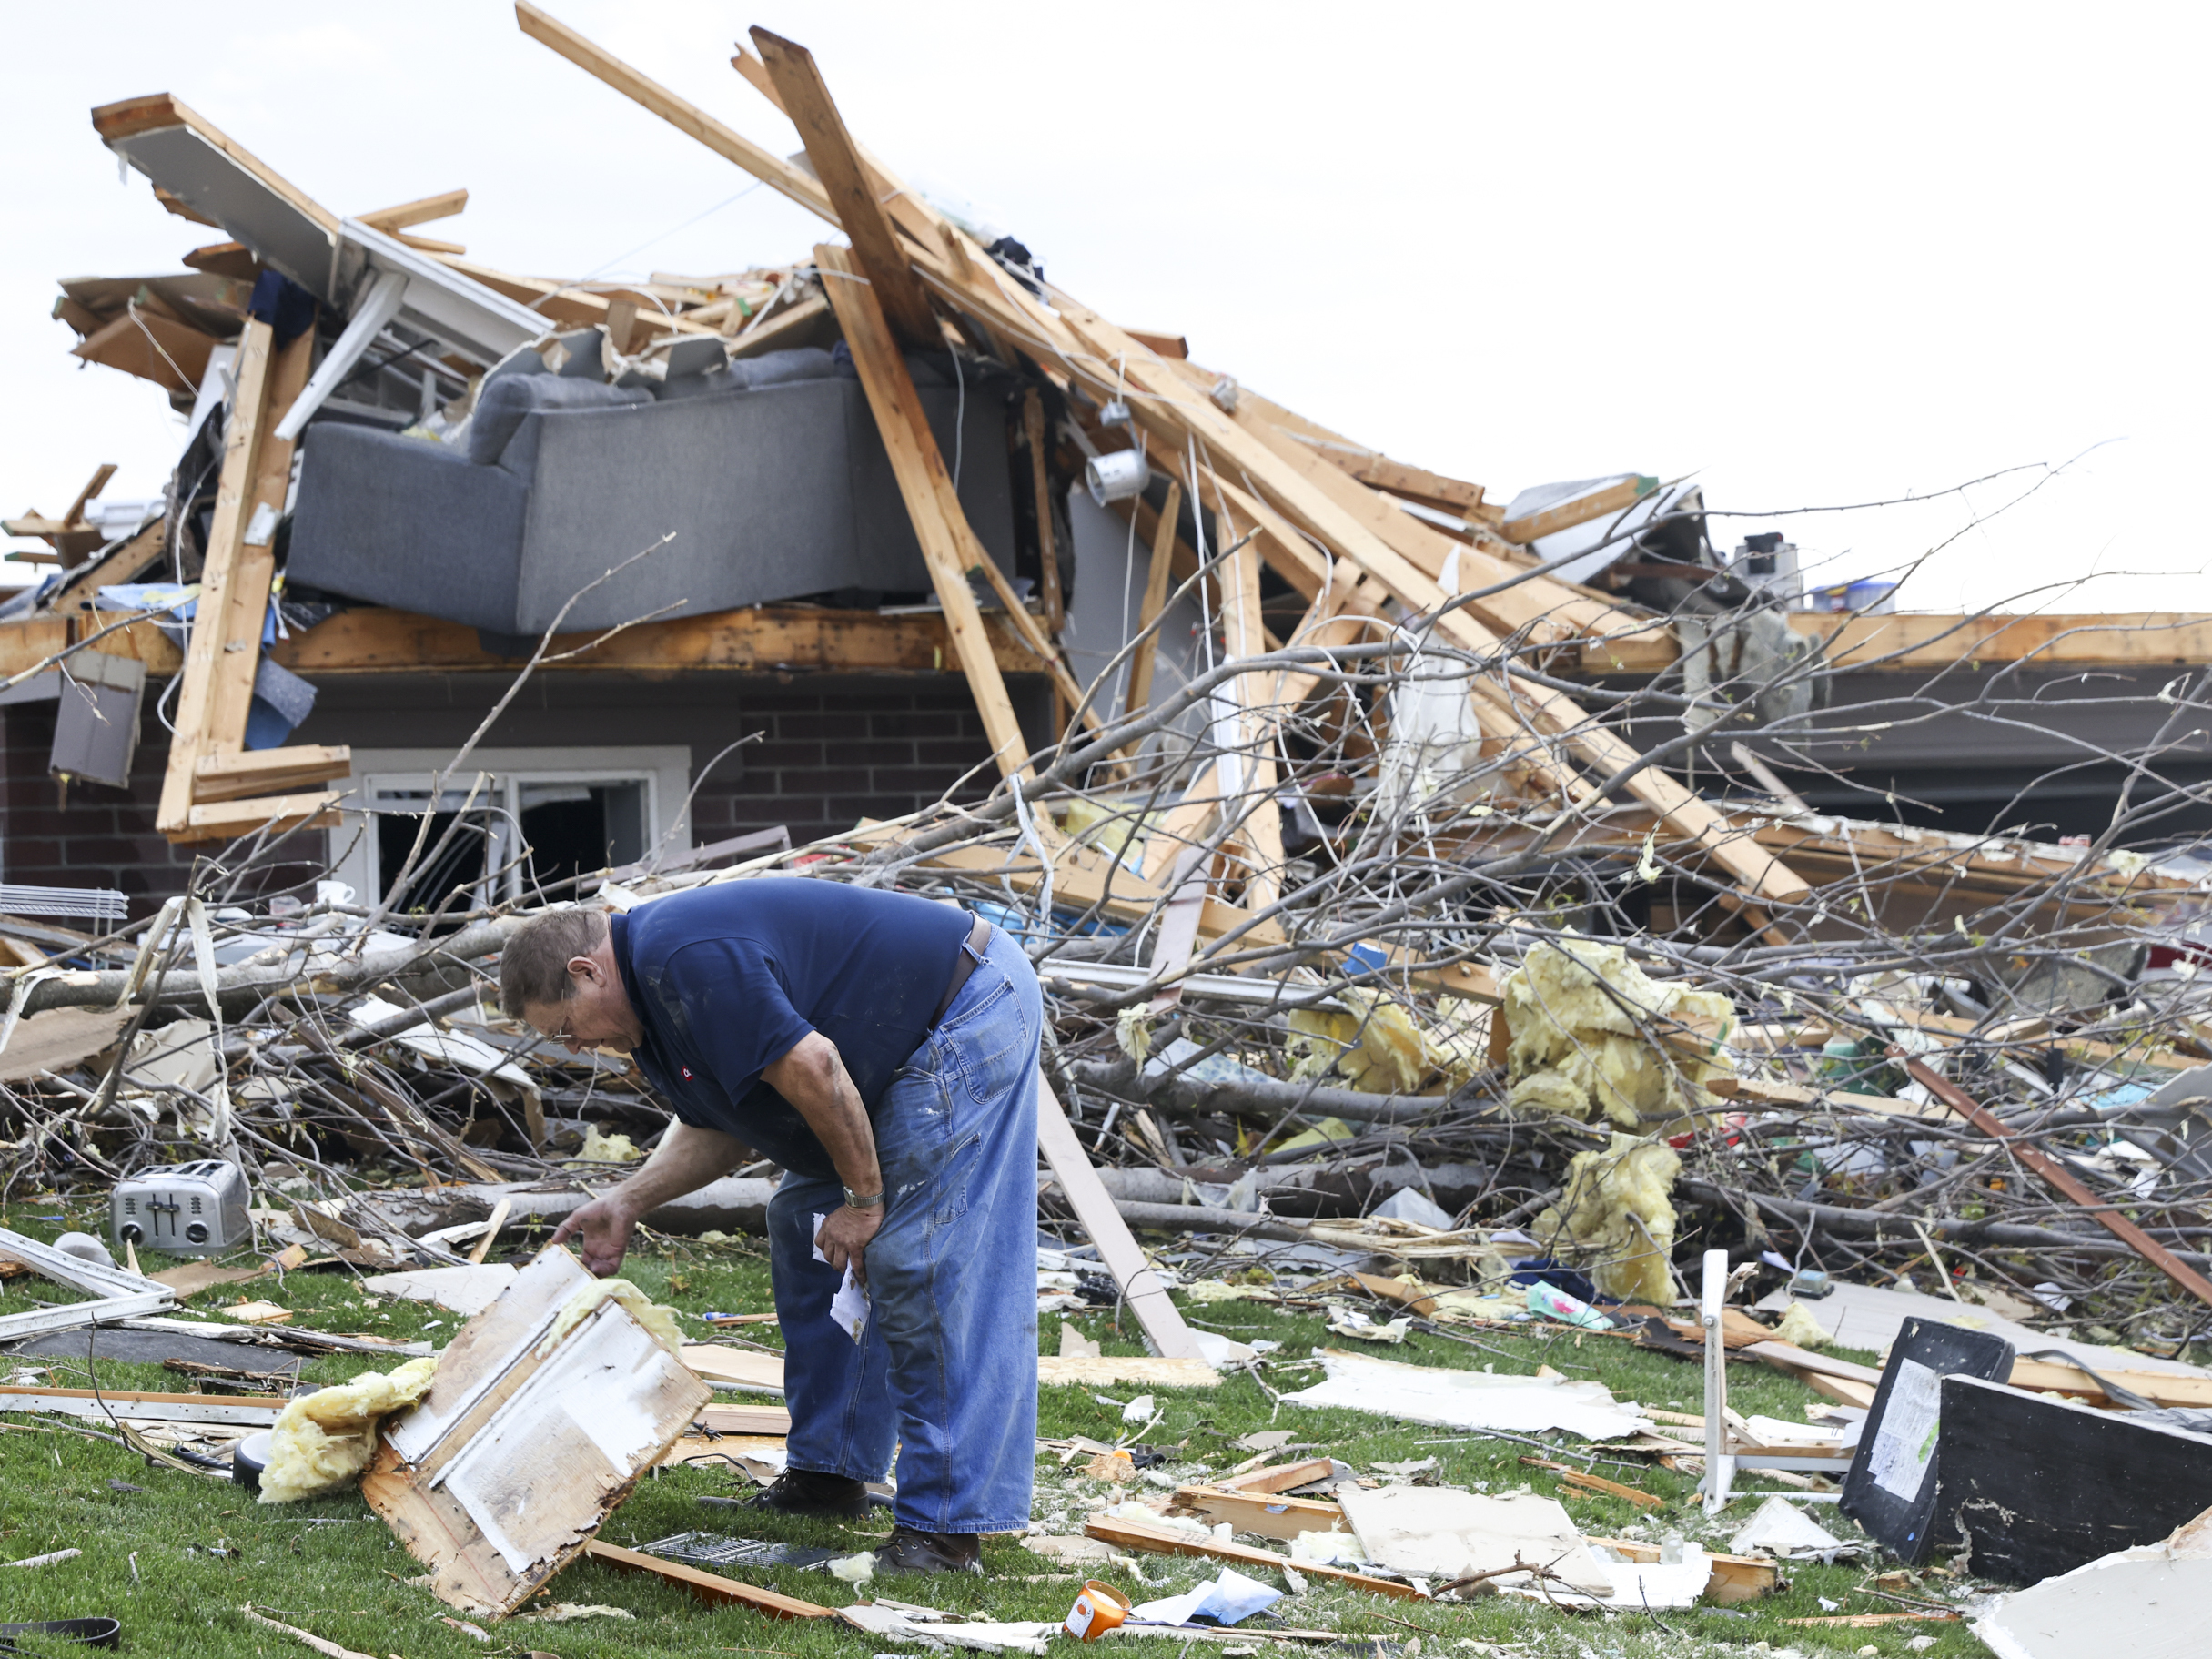 Terry Kicking sifts through the damage after a tornado leveled his home on Friday in Omaha, Neb.